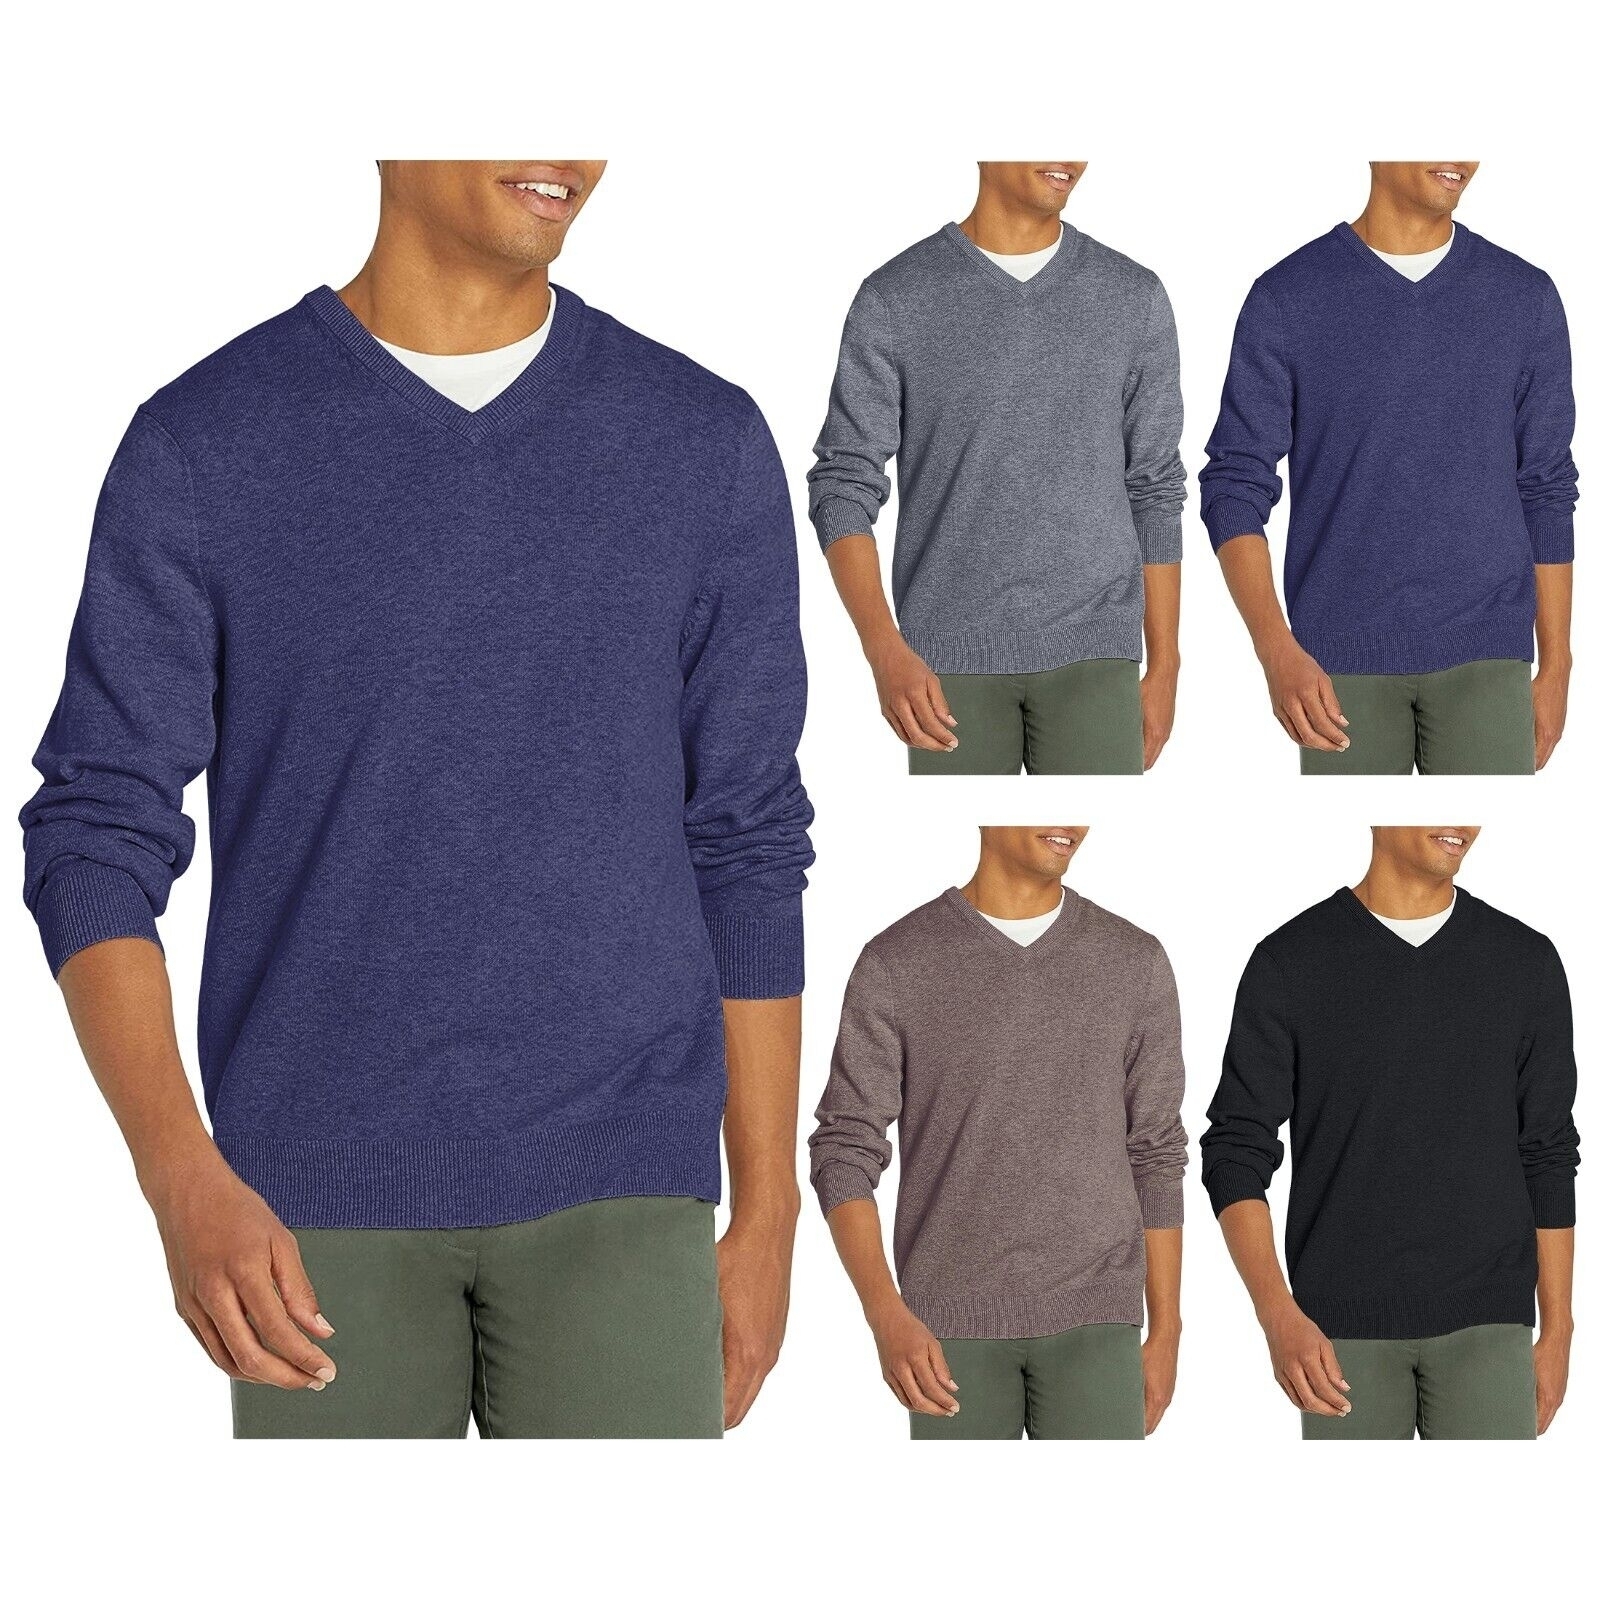 3-Pack Men's Casual Cozy Ultra Soft Slim Fit Warm Knit Pullover V-Neck Sweater - X-Large